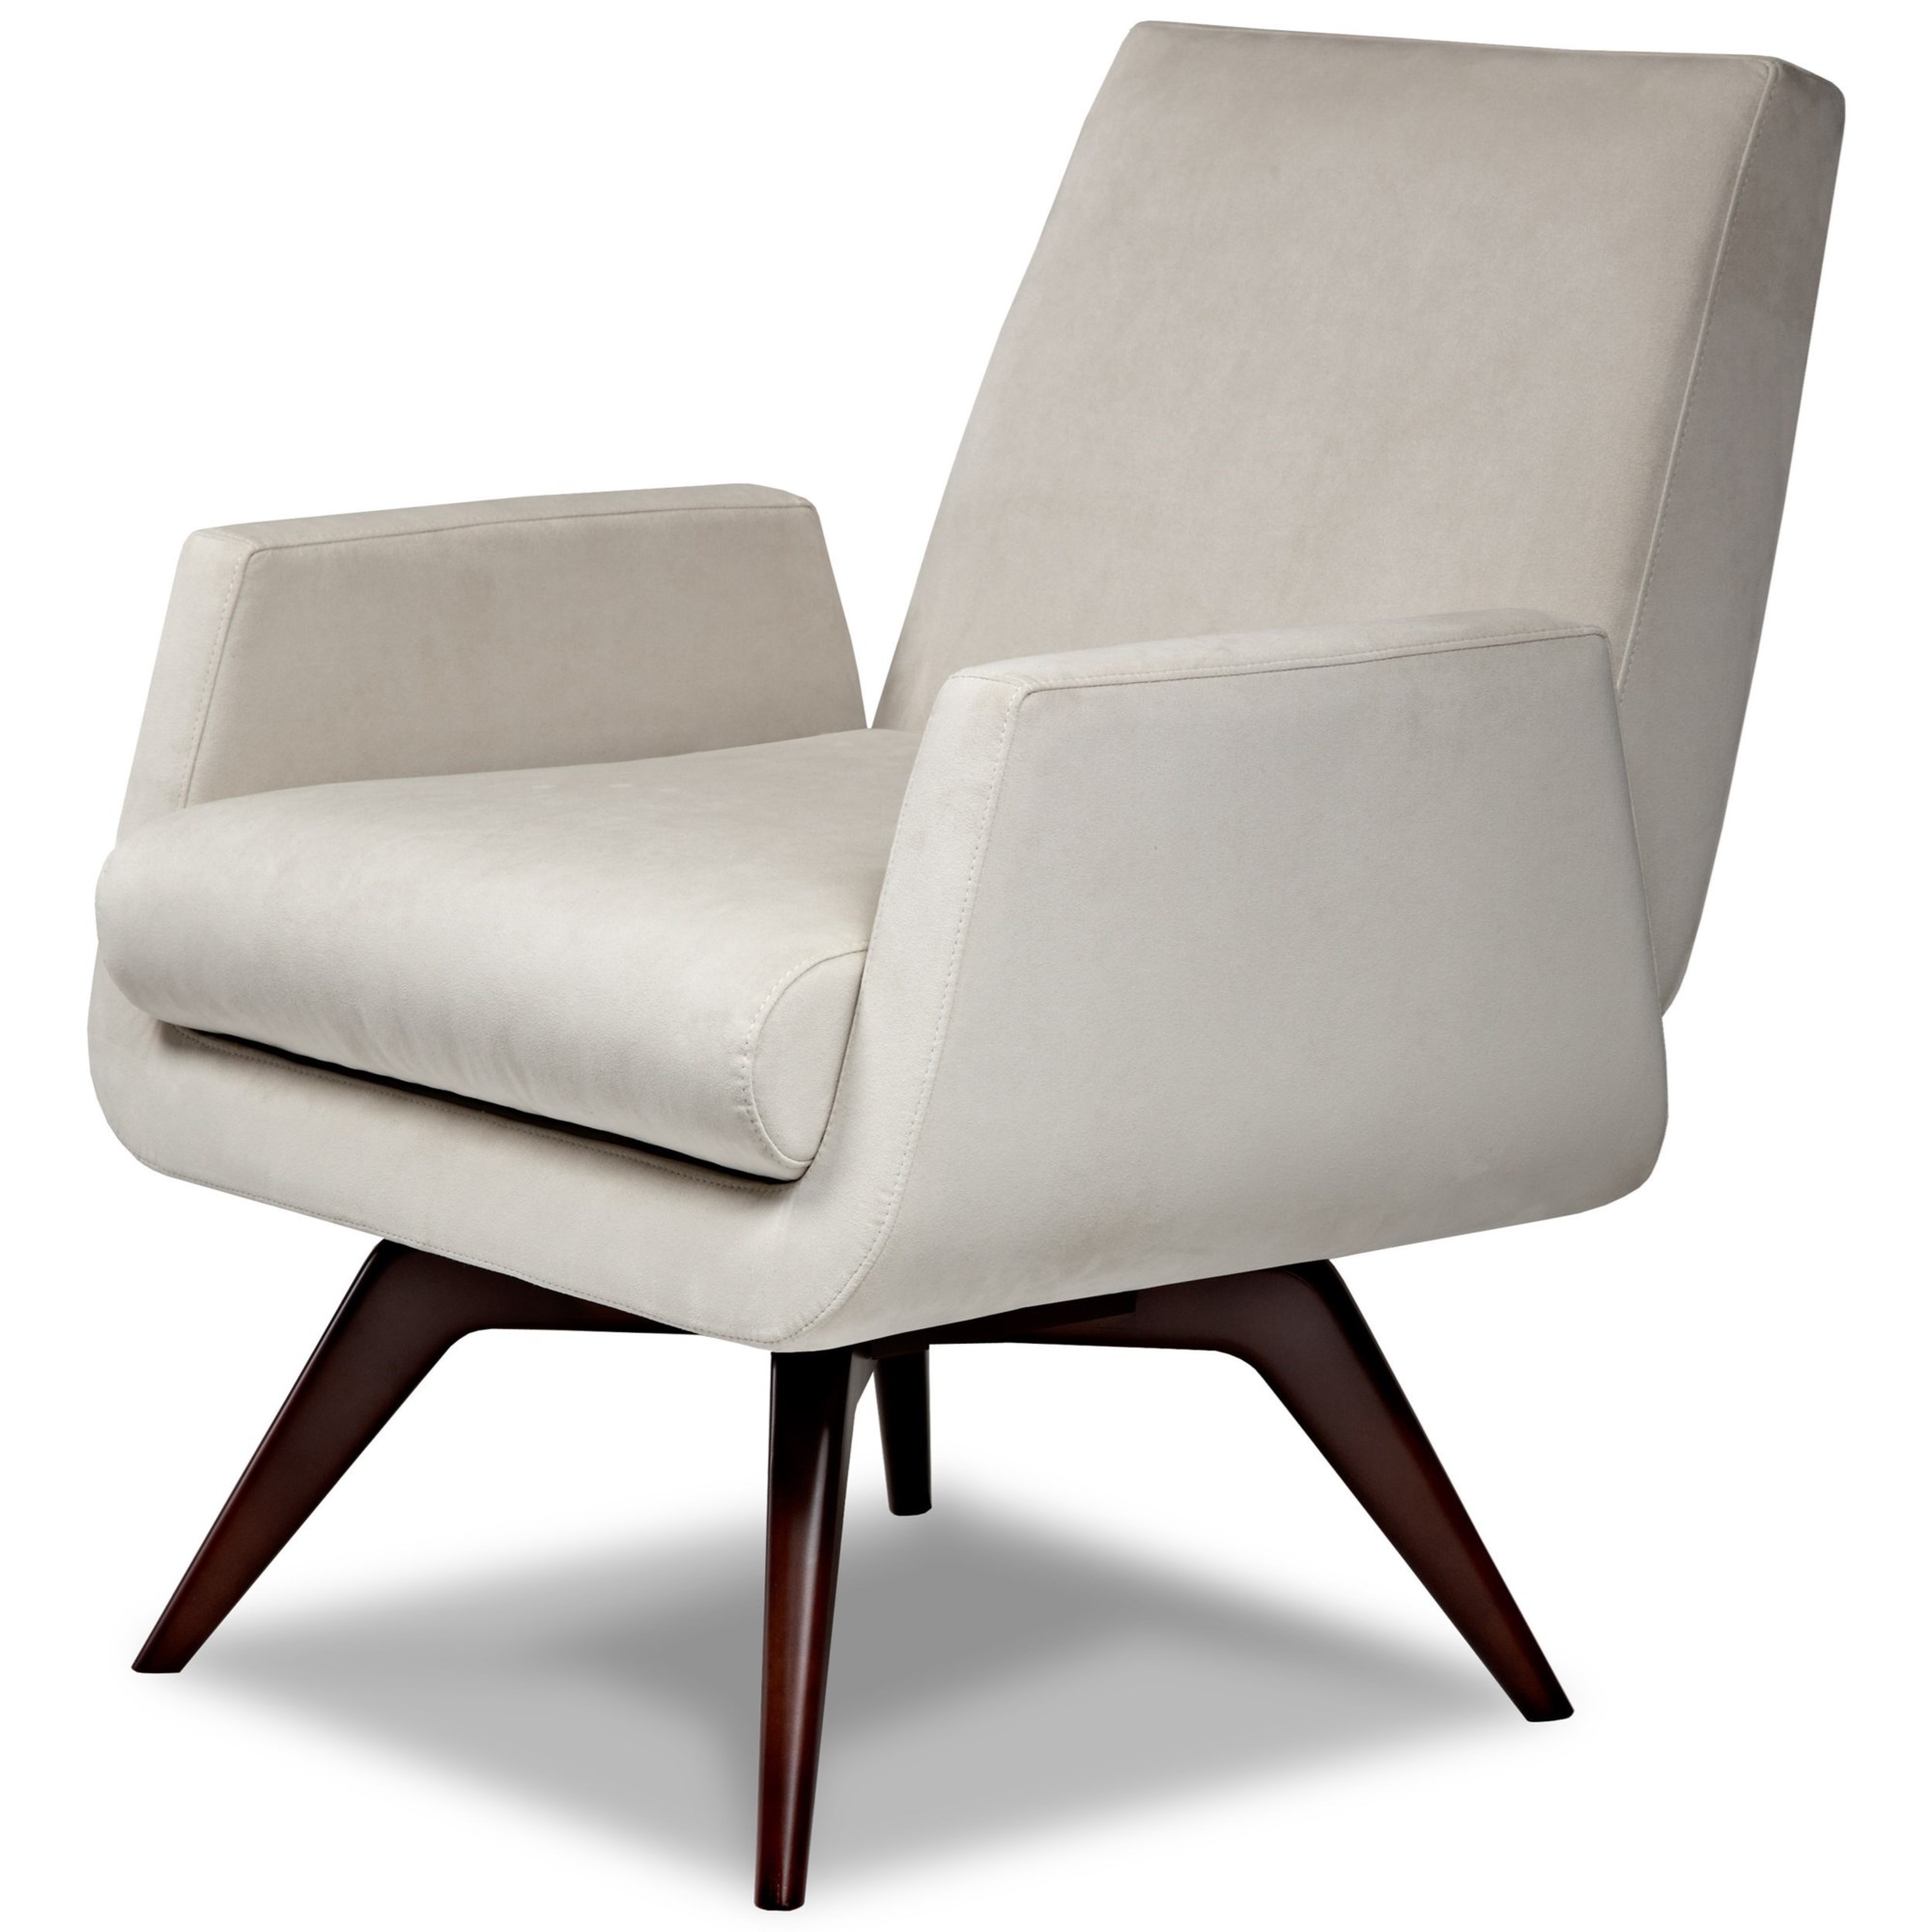 Mid-Century Modern Leather Swivel Lounge Chair With a Footstool –